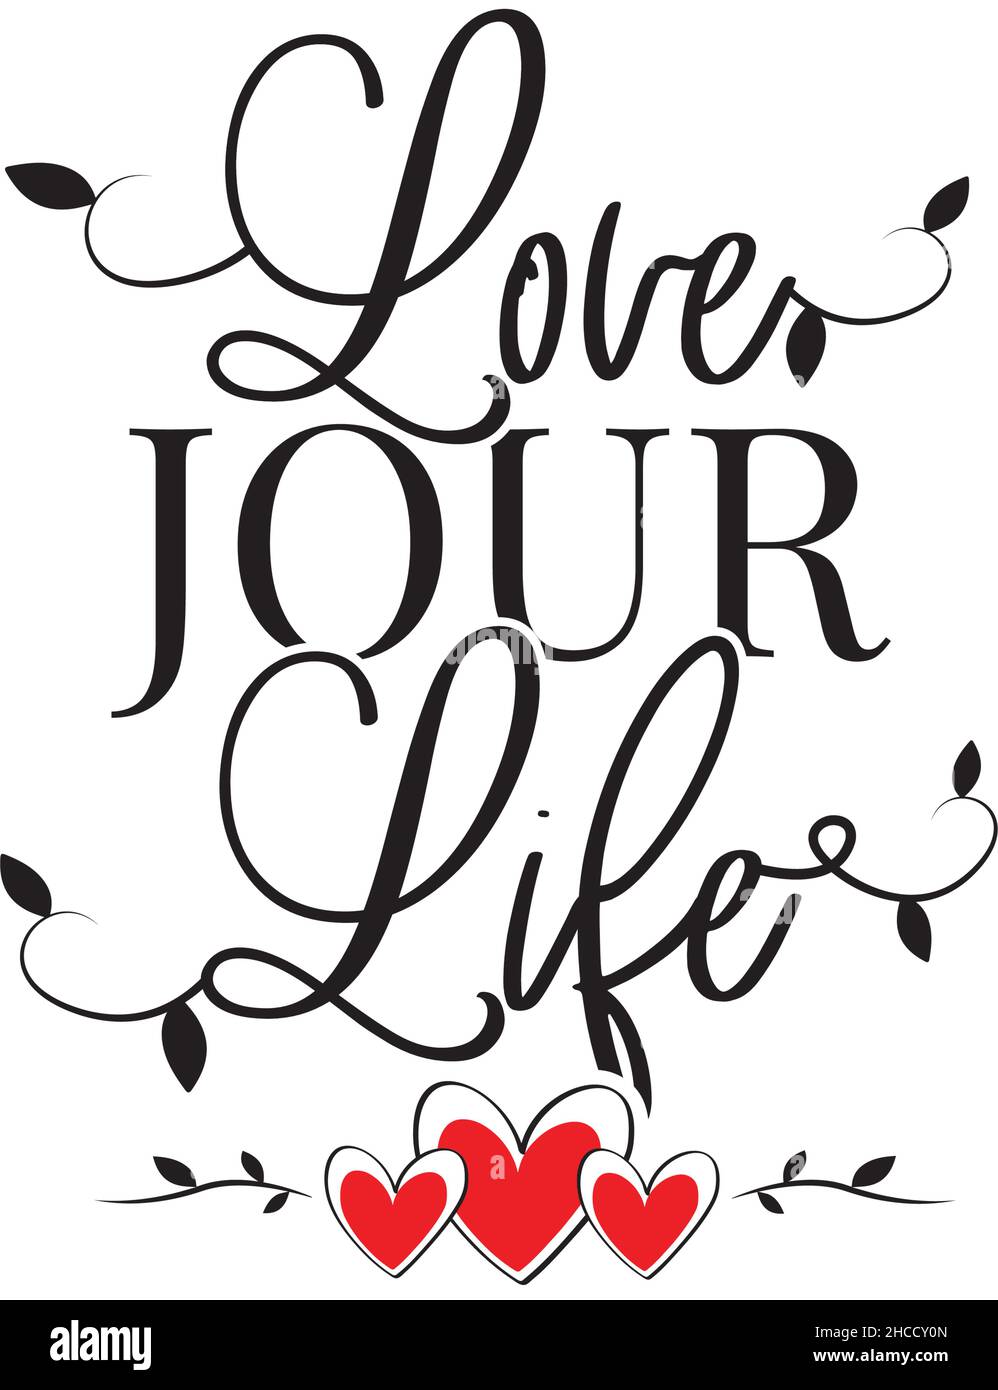 Love your life, vector. Motivational inspirational positive life quotes. Wording design isolated on white background, lettering. Wall decals, wall art Stock Vector